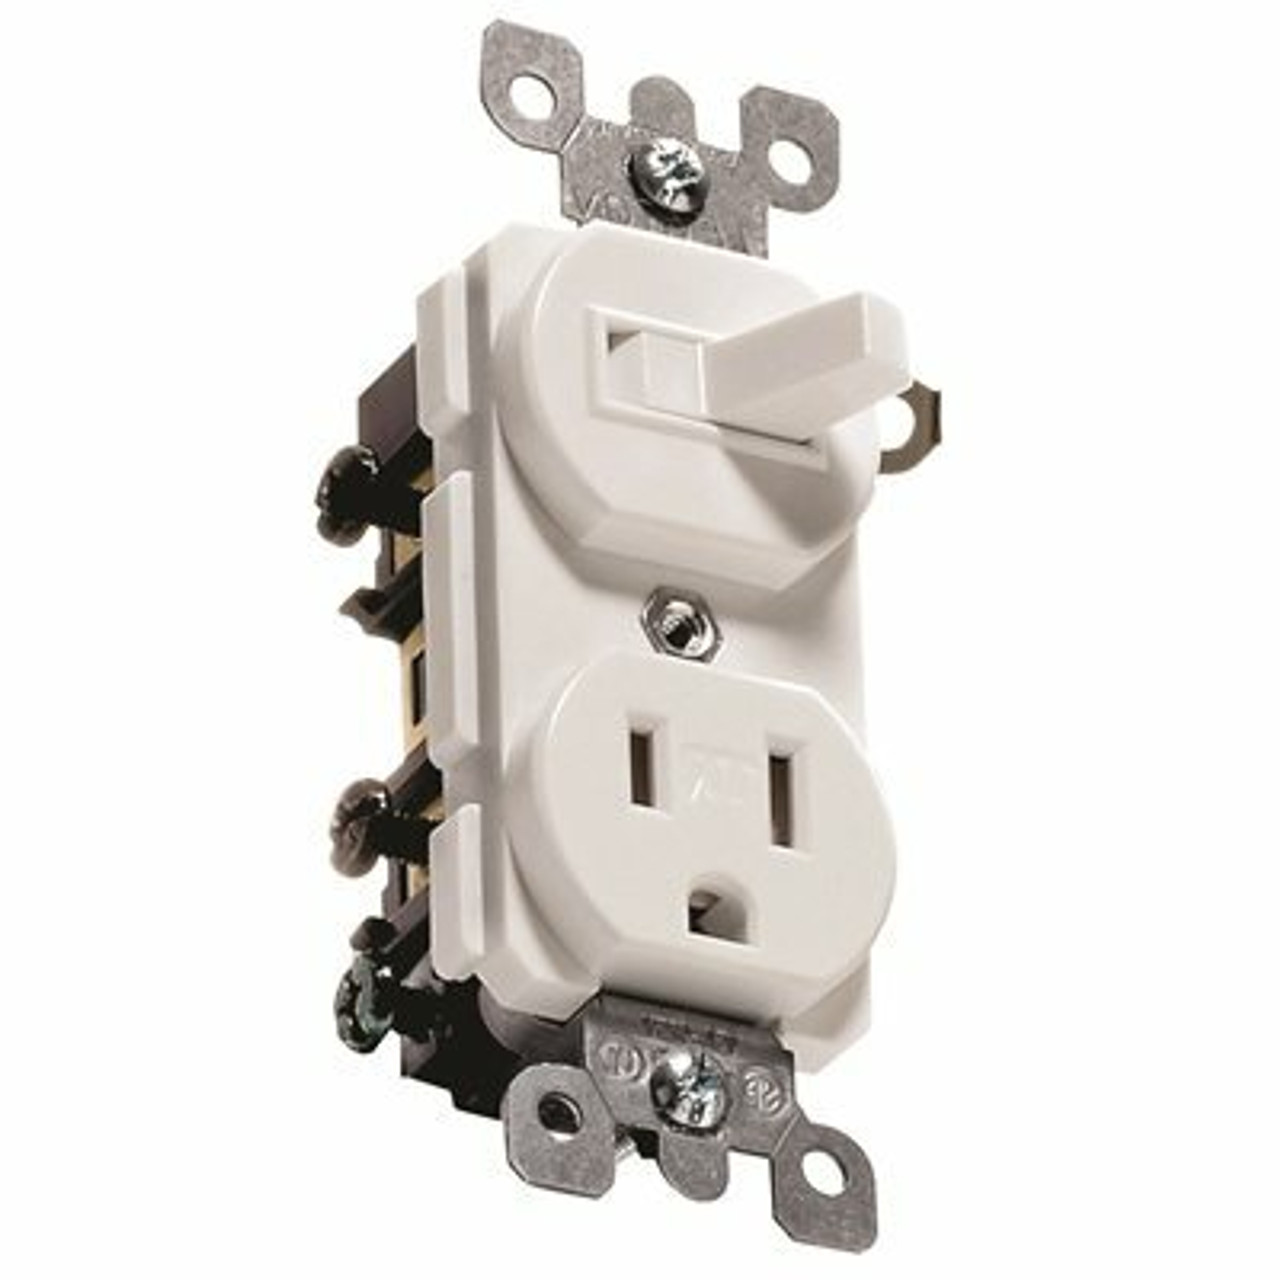 Leviton 120-Volt 15 Amp 1-Pole Commercial Grade Tamper-Resistant Combo Duplex Receptacle/Toggle Switch, White